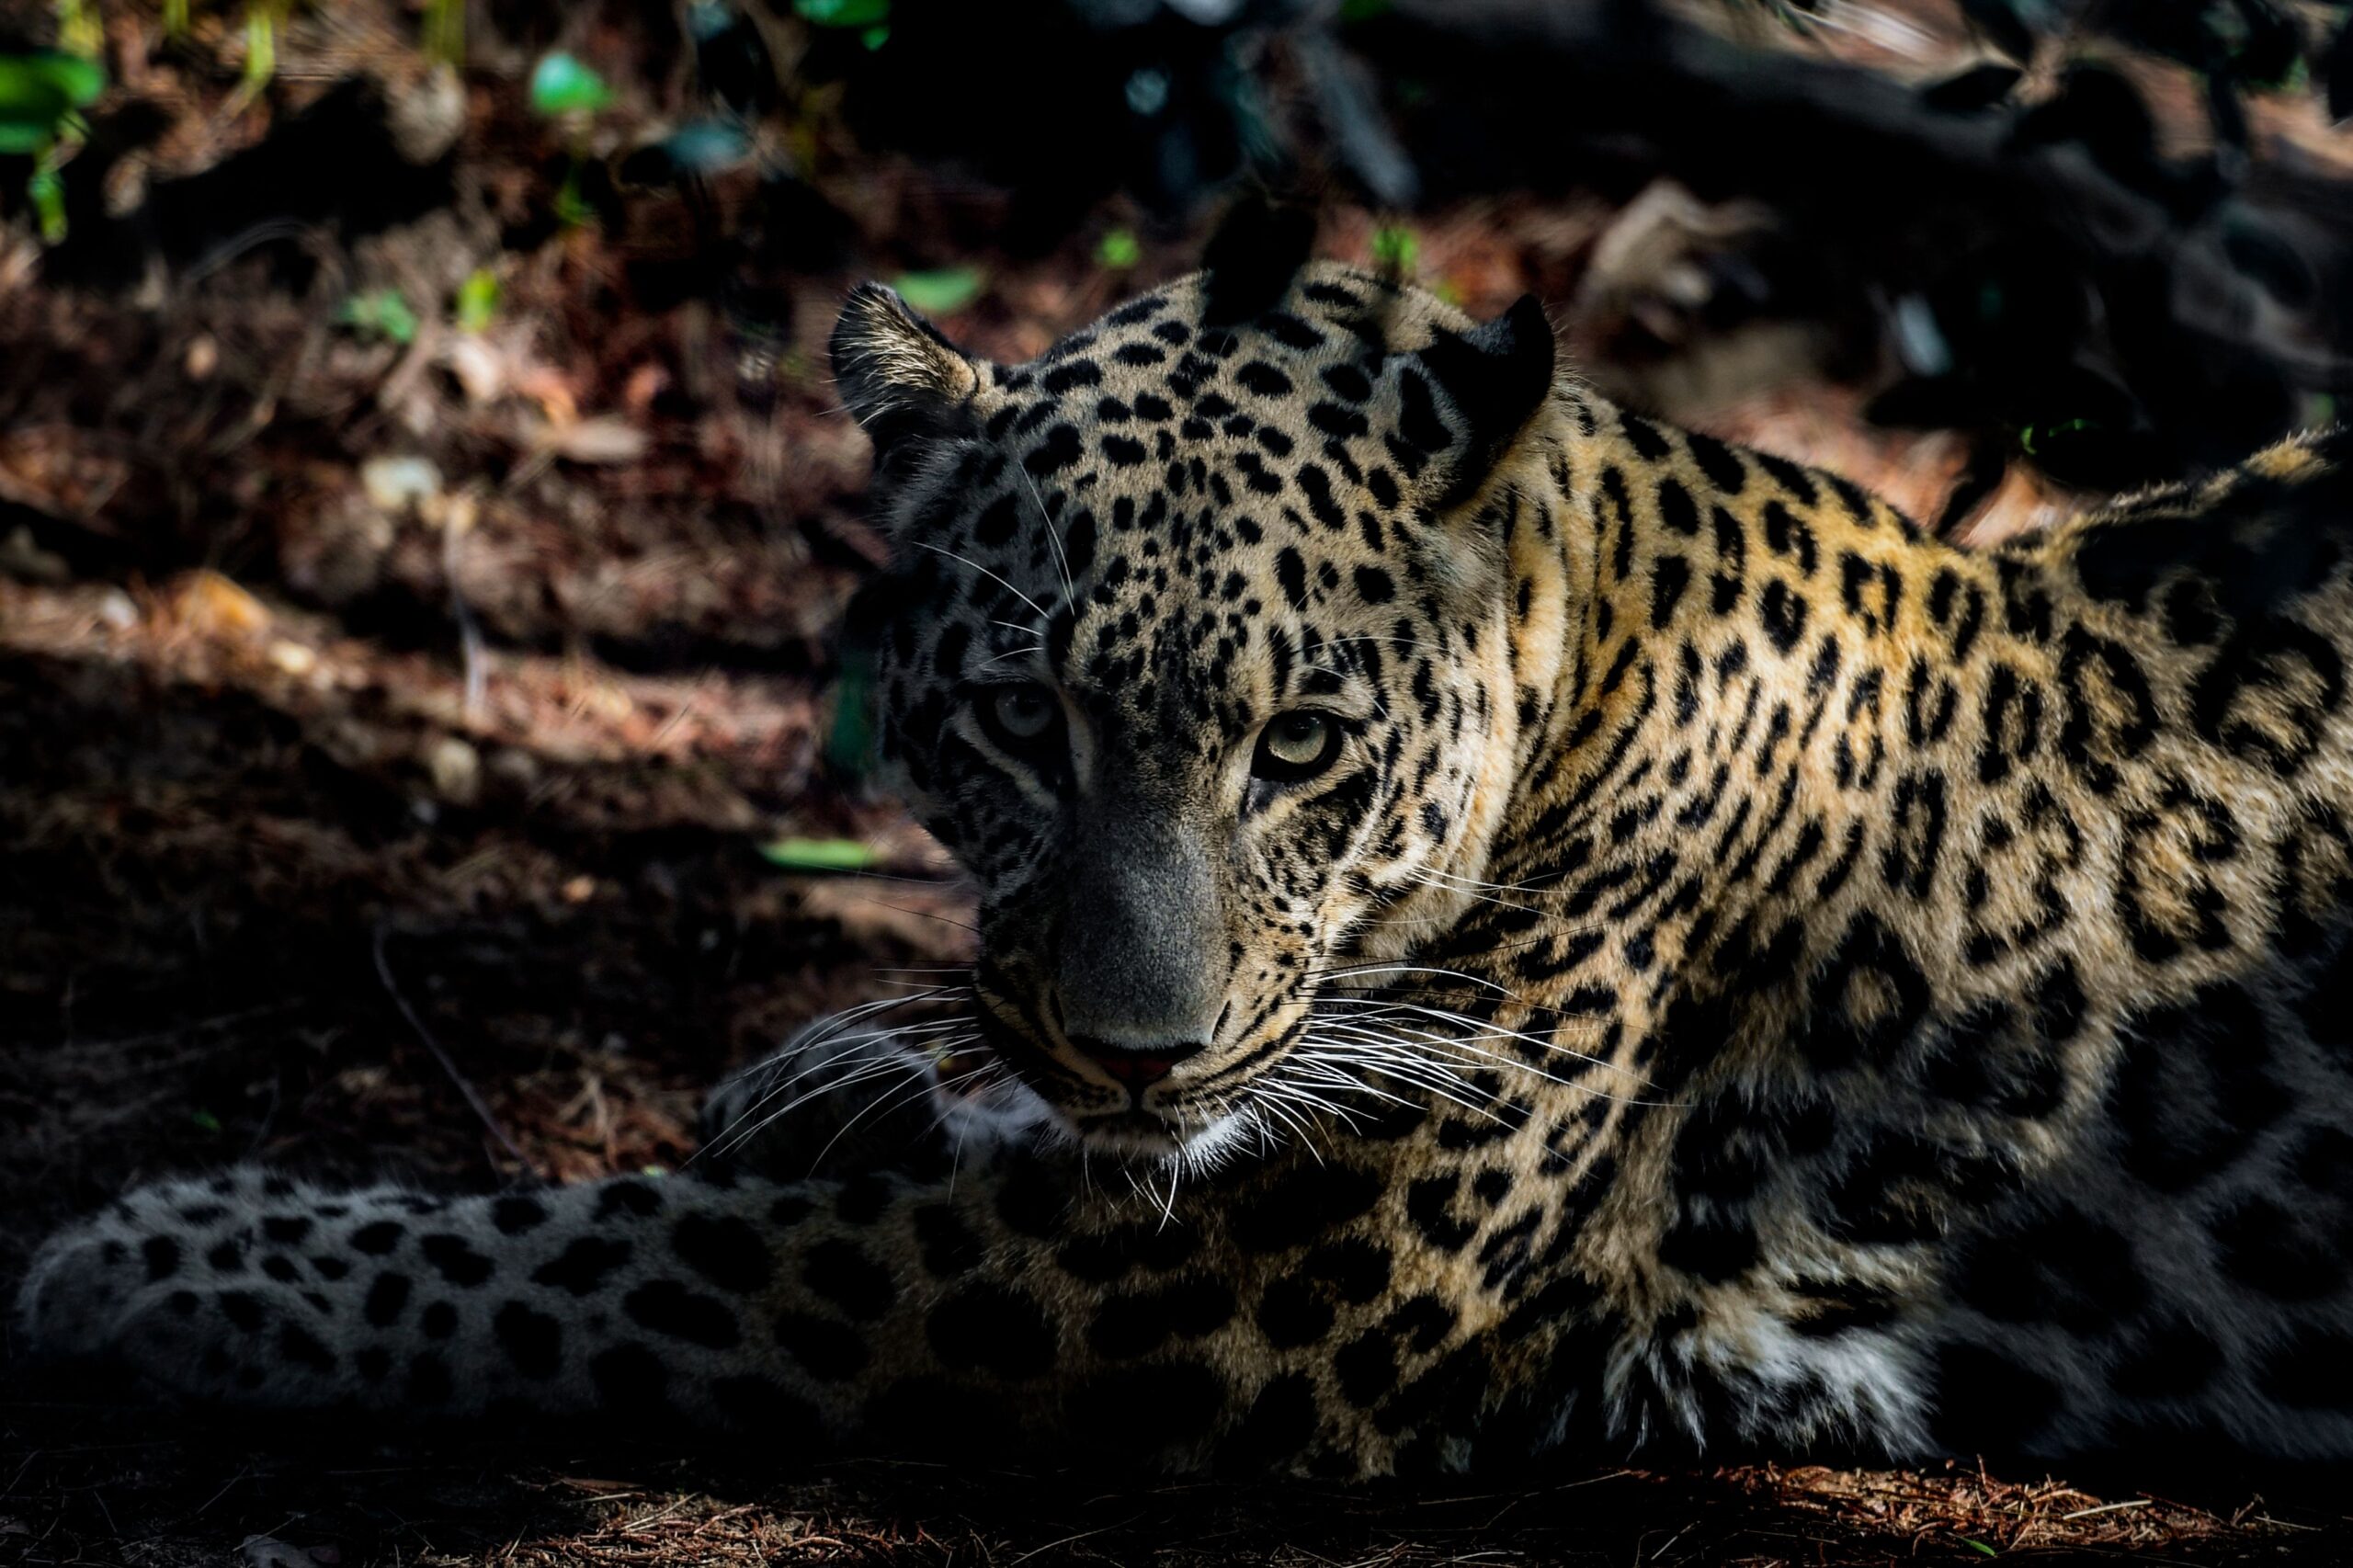 An adult male Persian leopard is pictured at Lisbon Zoo on 15 November 2019 [PATRICIA DE MELO MOREIRA/AFP/Getty Images]